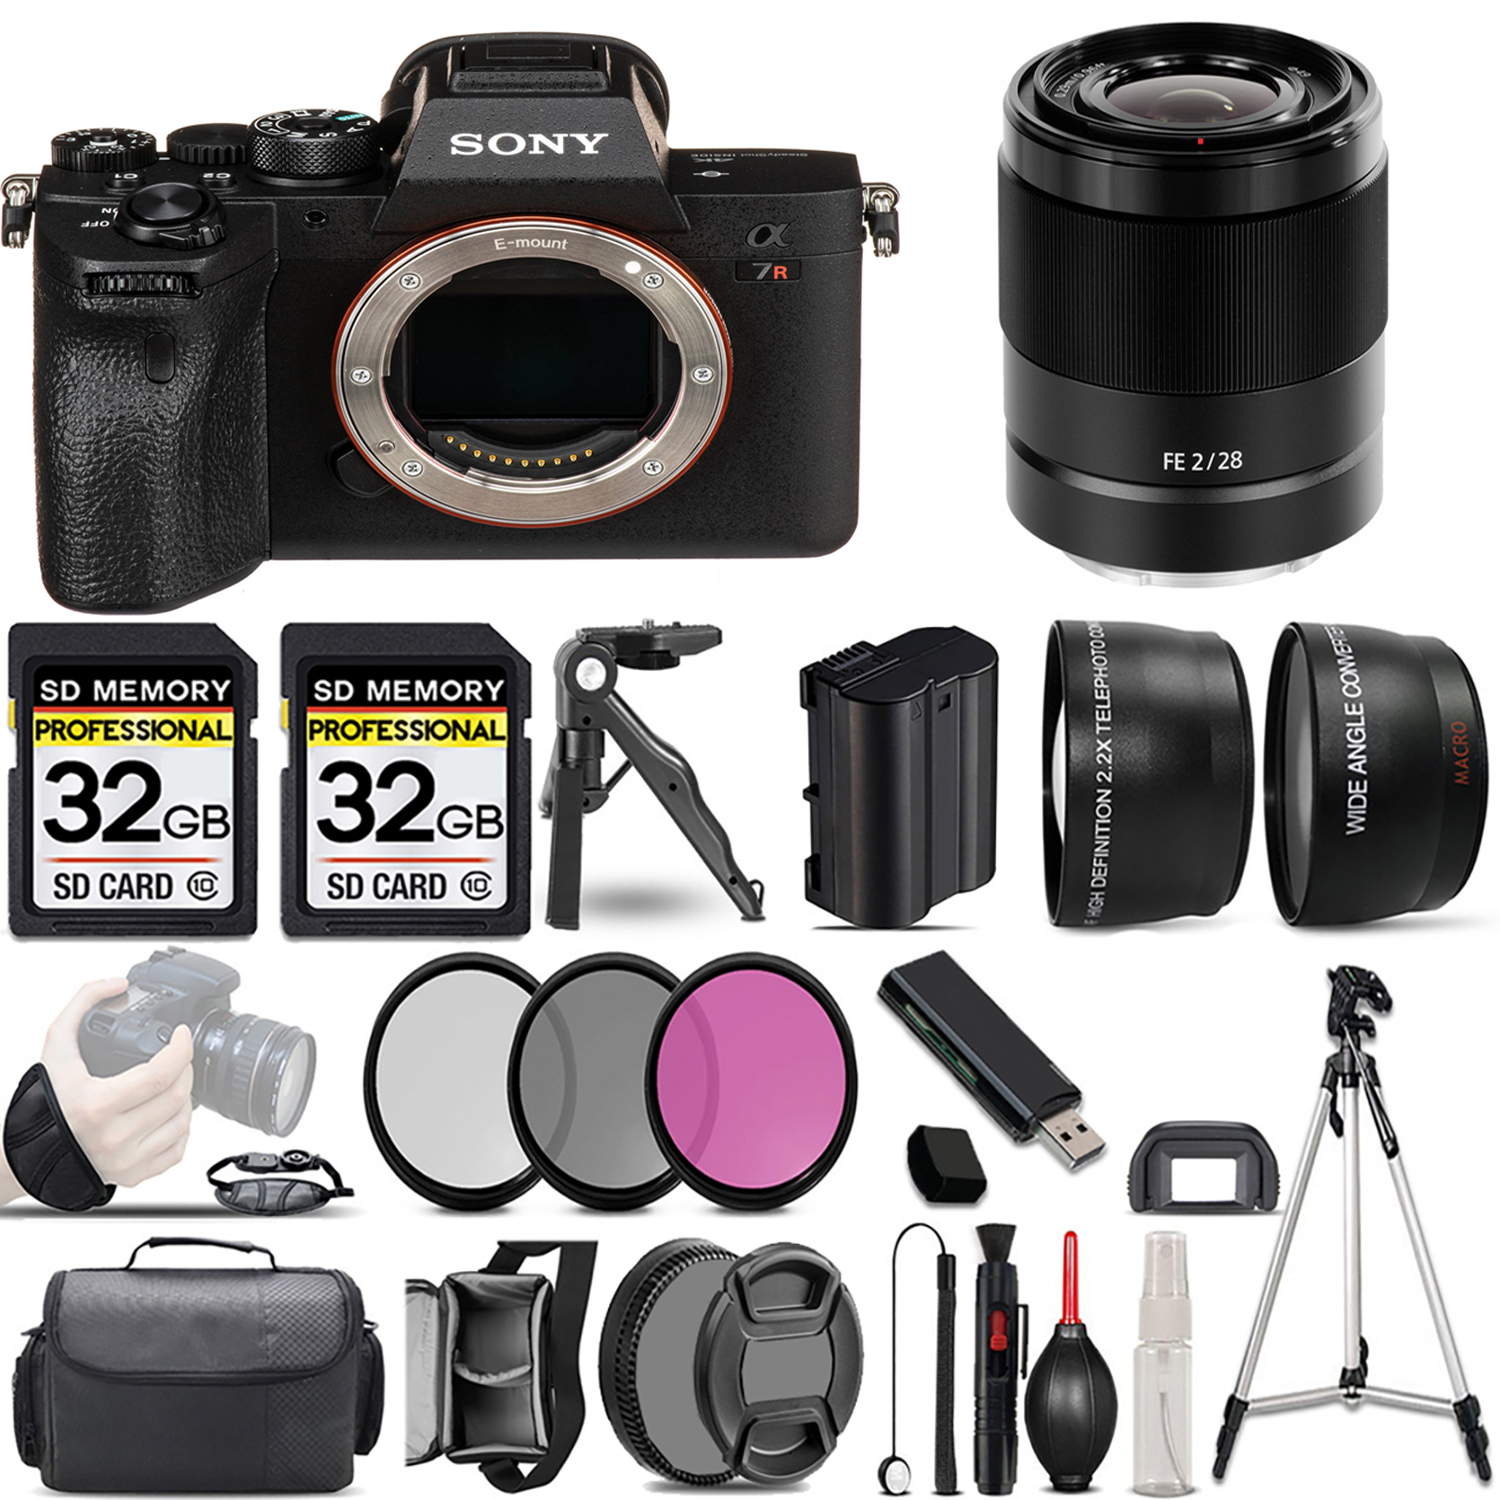 a7R IVA Mirrorless Camera + 28mm f/2 Lens + 3 Piece Filter Set + 64GB + Bag & More! *FREE SHIPPING*